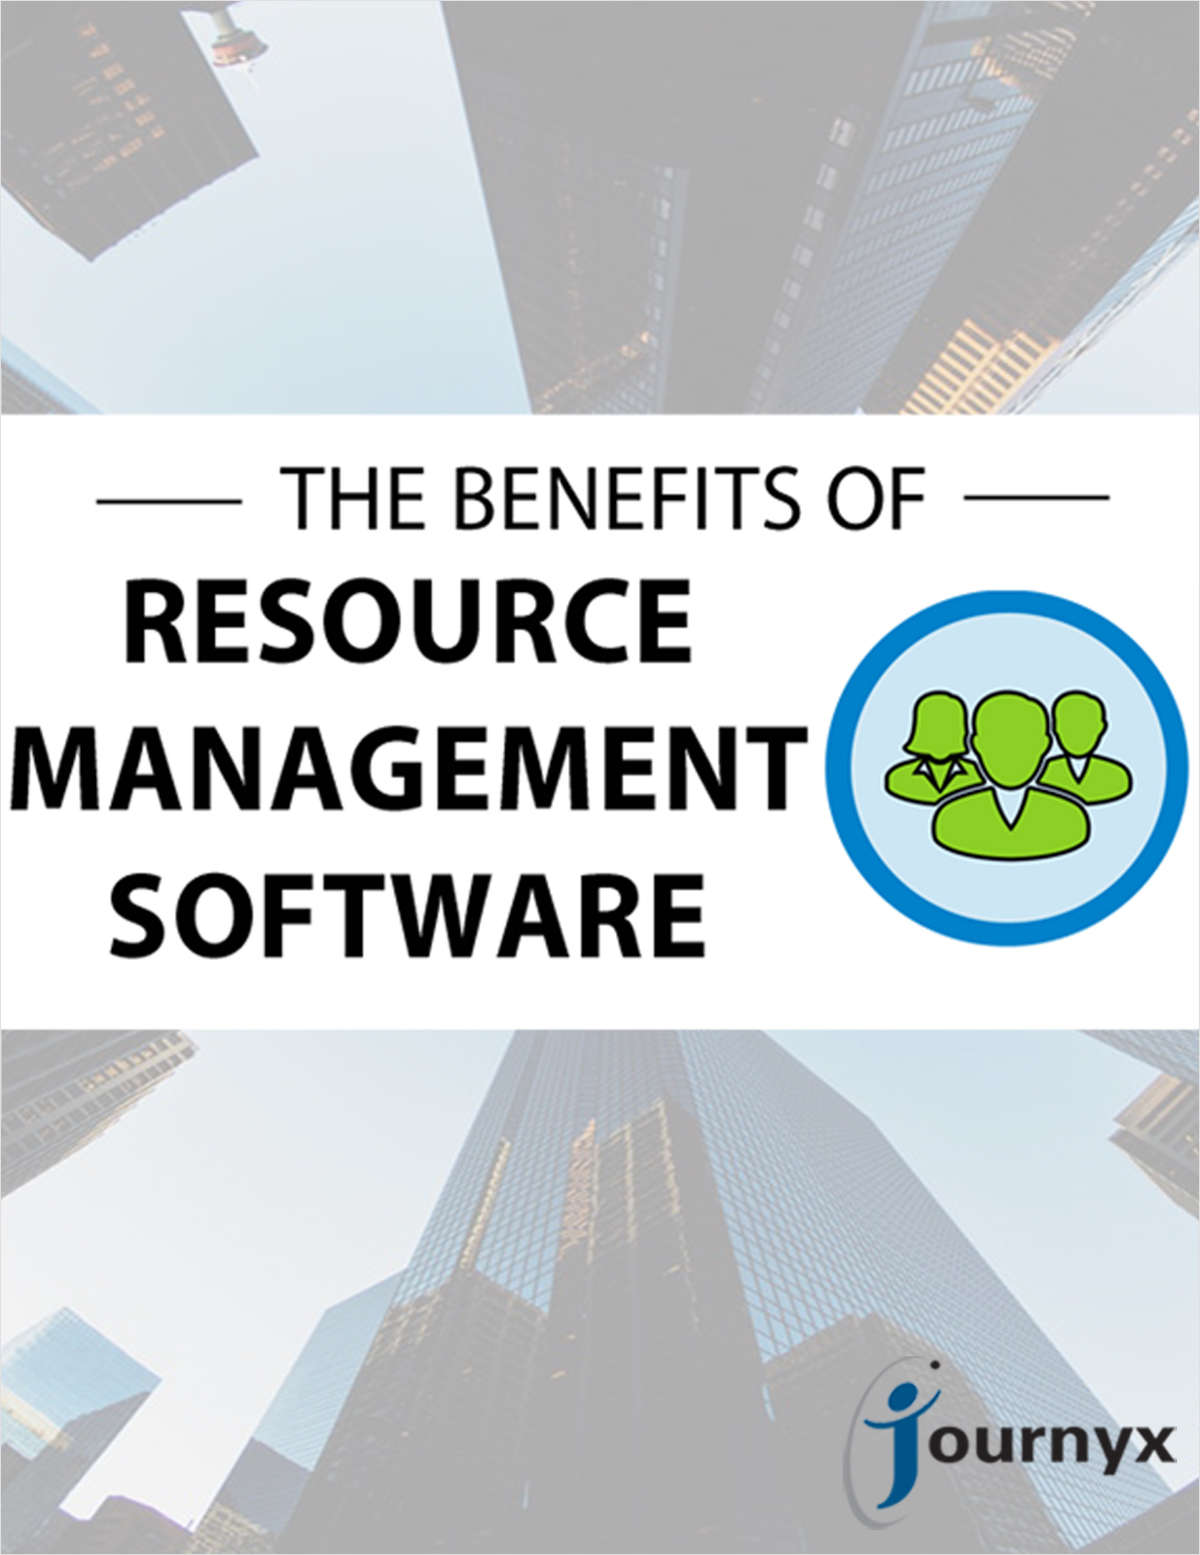 Project Management Essentials: The Benefits of Resource Management Software